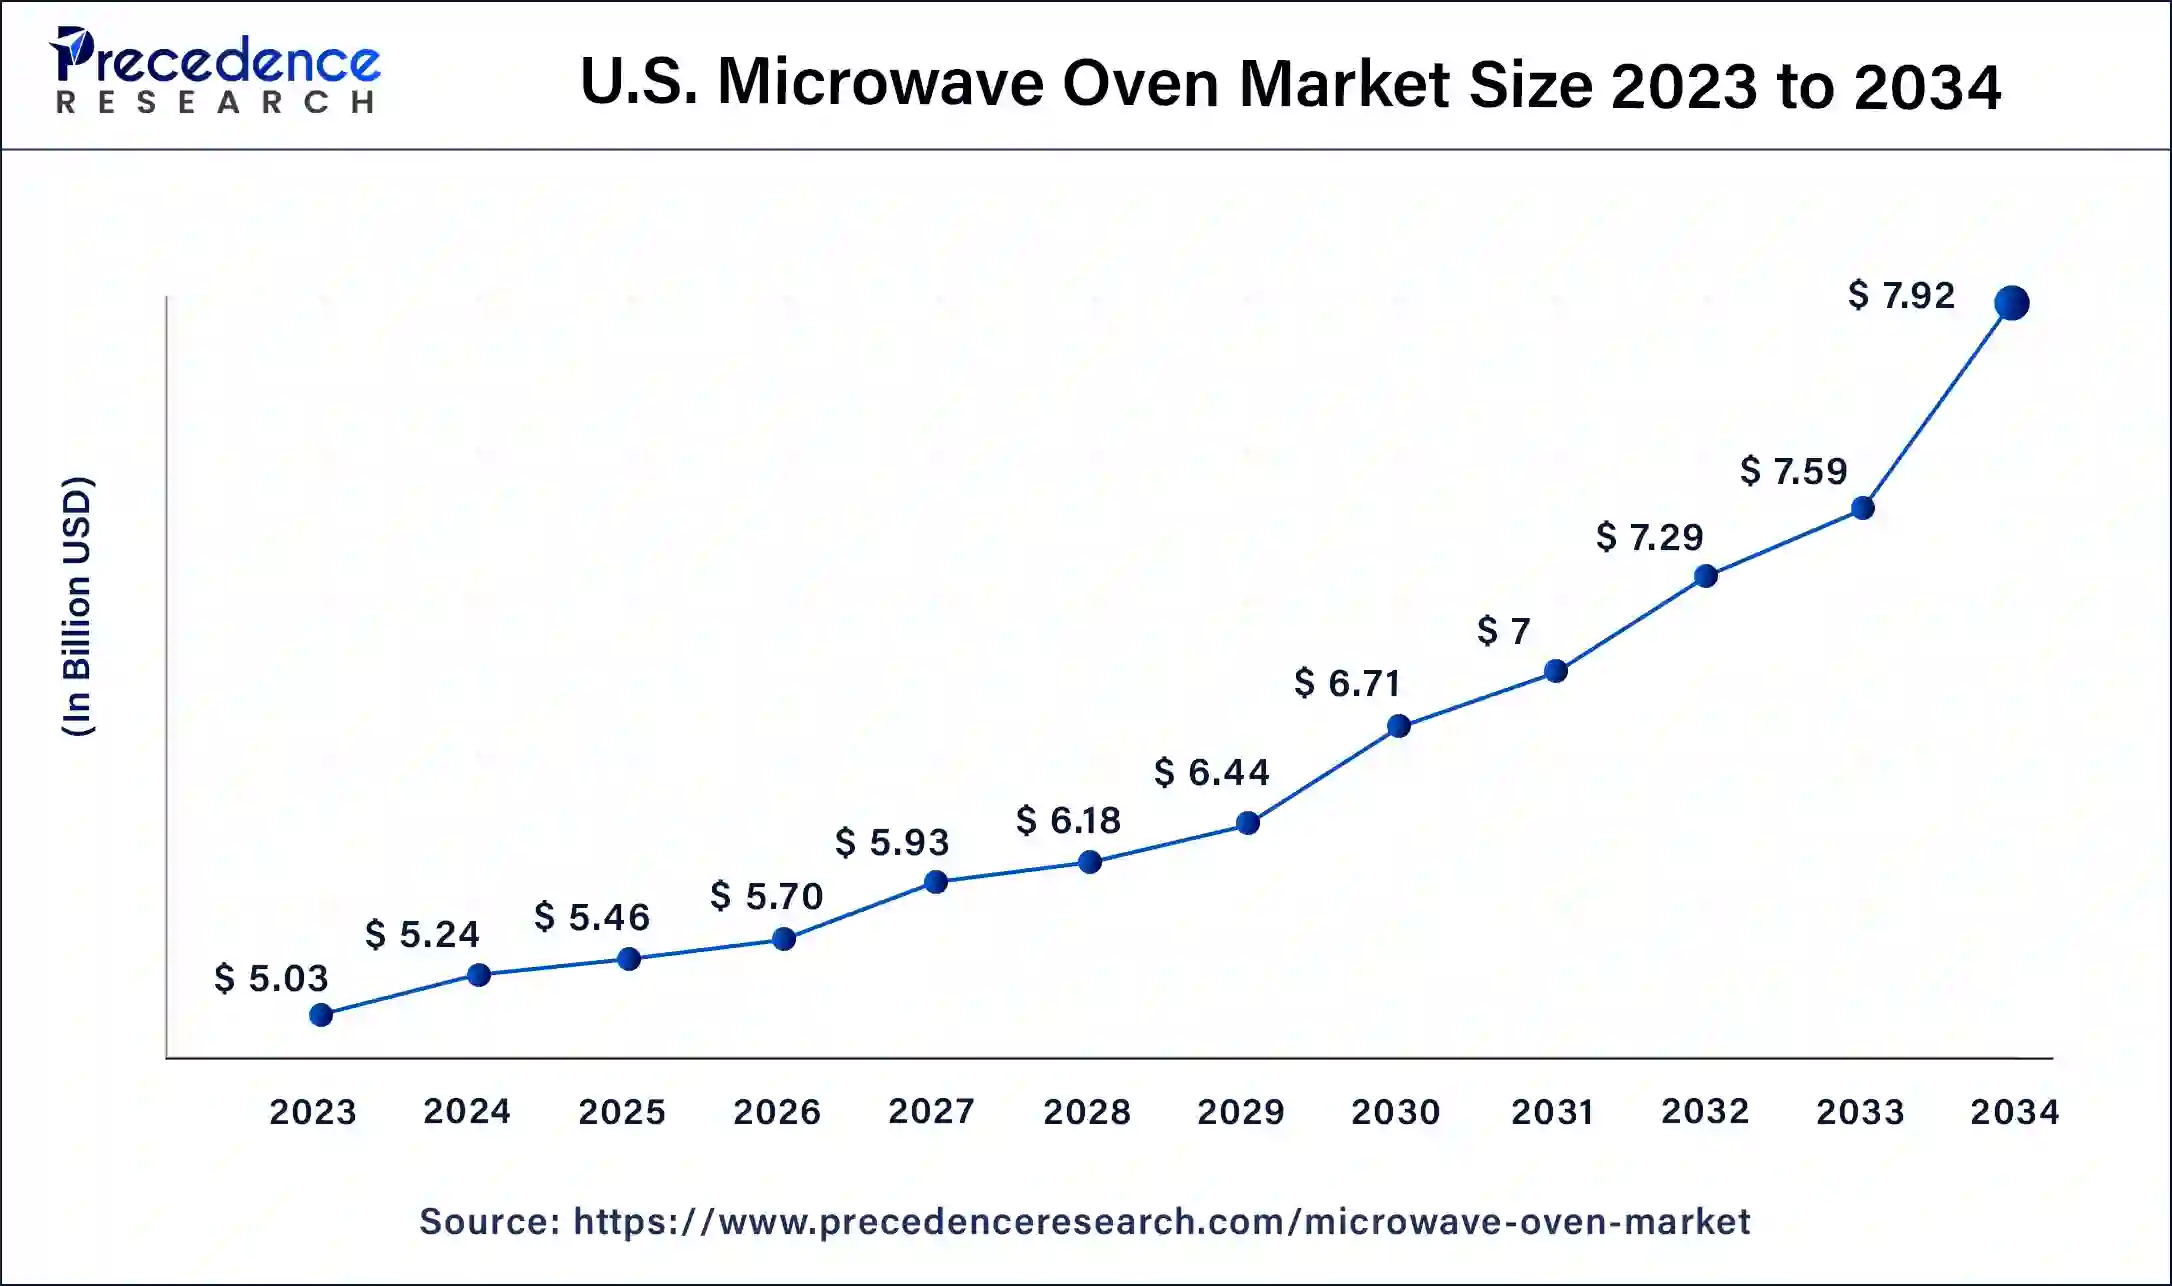 U.S. Microwave Oven Market Size 2024 to 2034